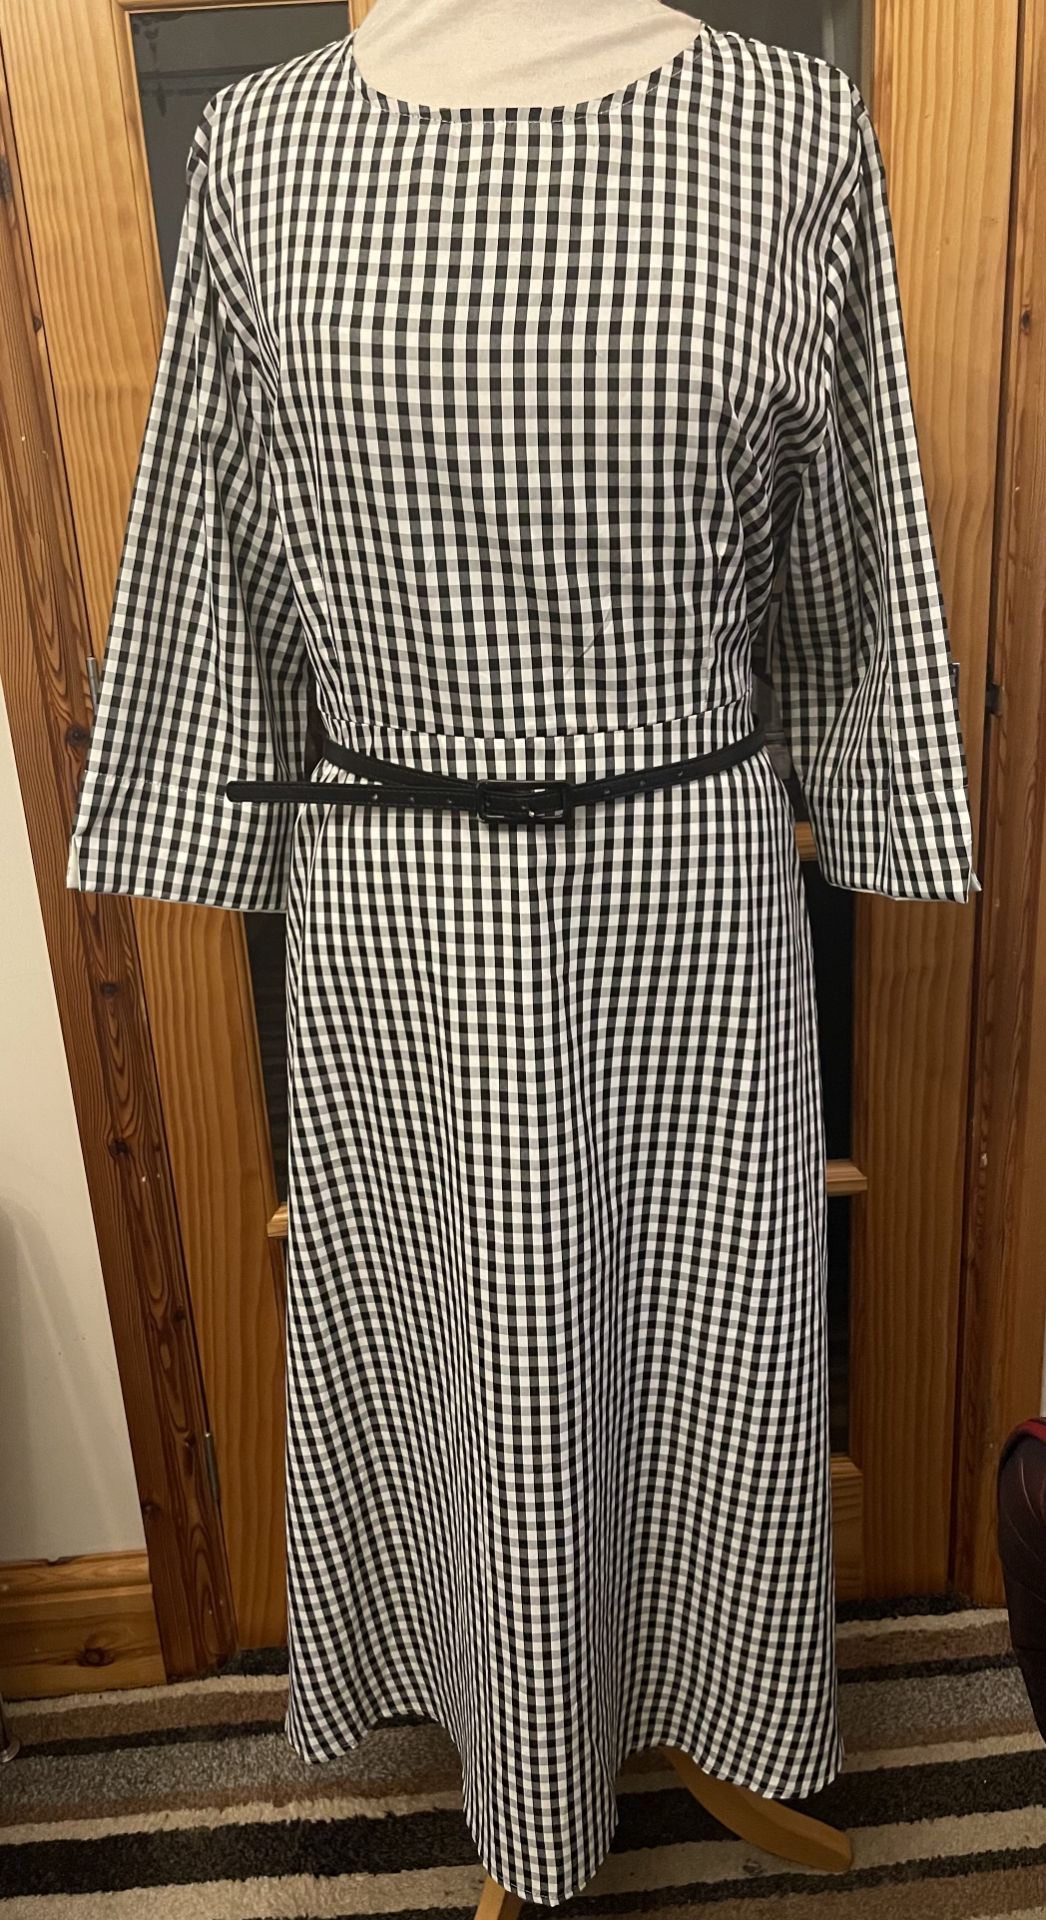 Modern Fit and Flare ( 4XL) Black and White Check Dress - Bild 2 aus 2